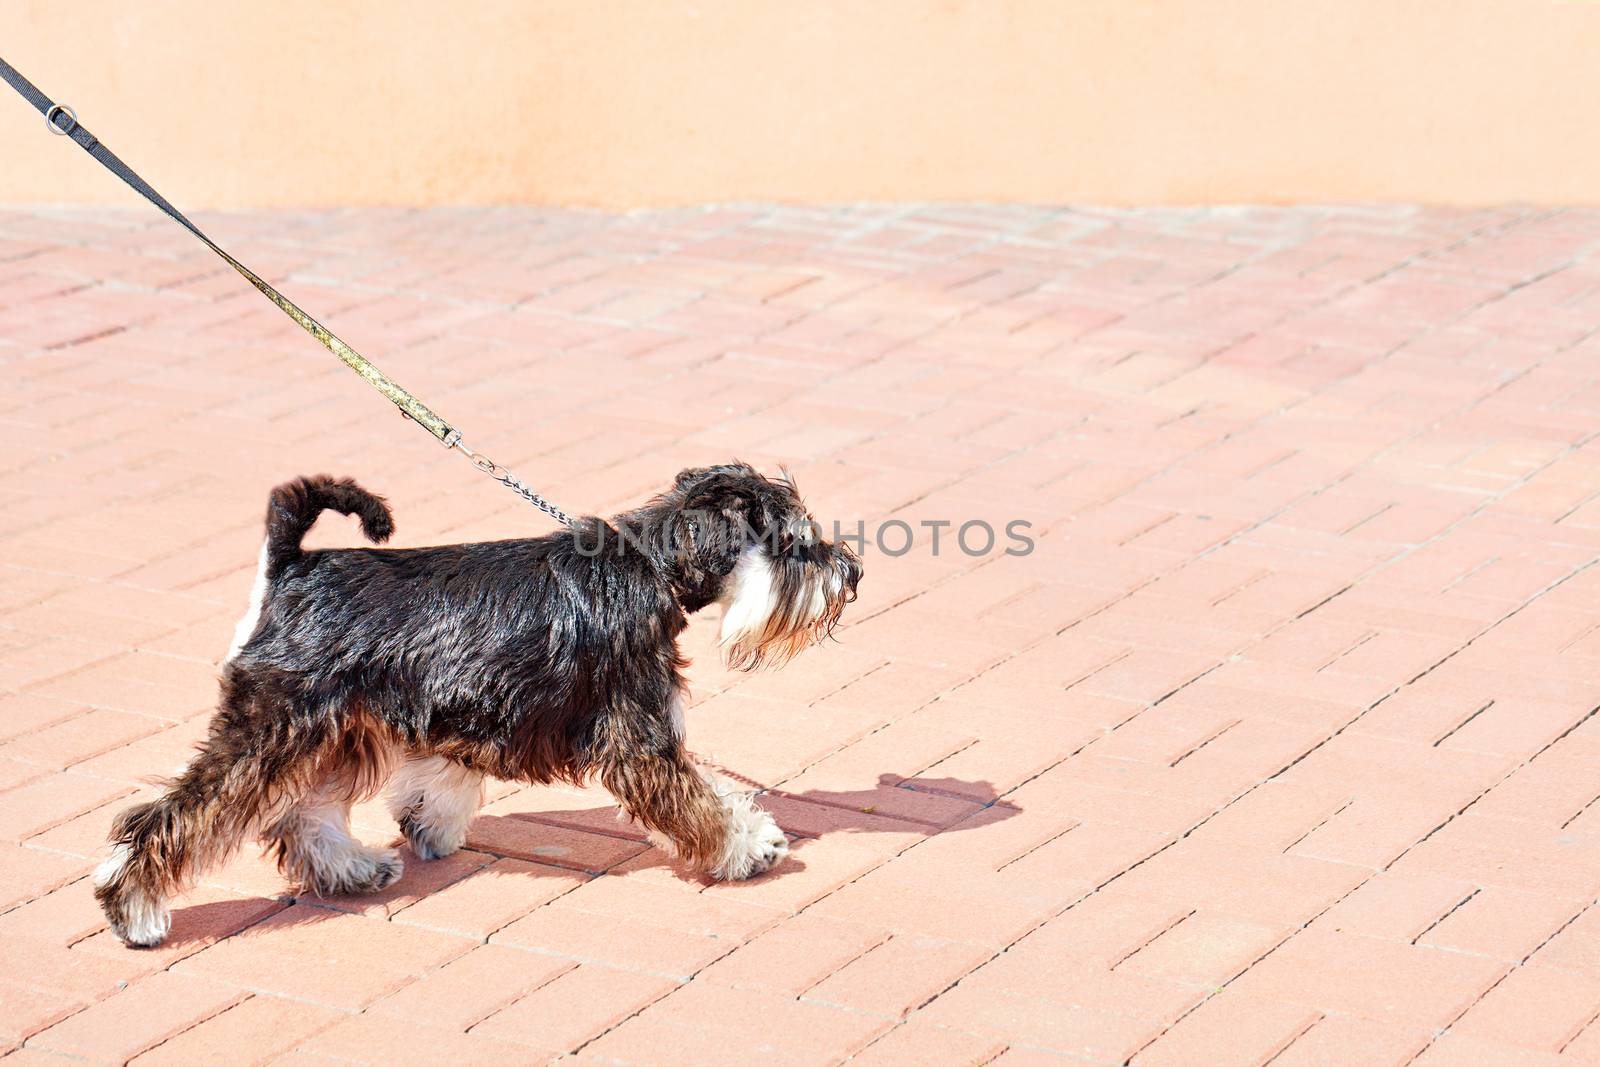 Schnauzer looks ahead, walks and is held back by a thin leather leash on a bright sunny day, image in copy space.